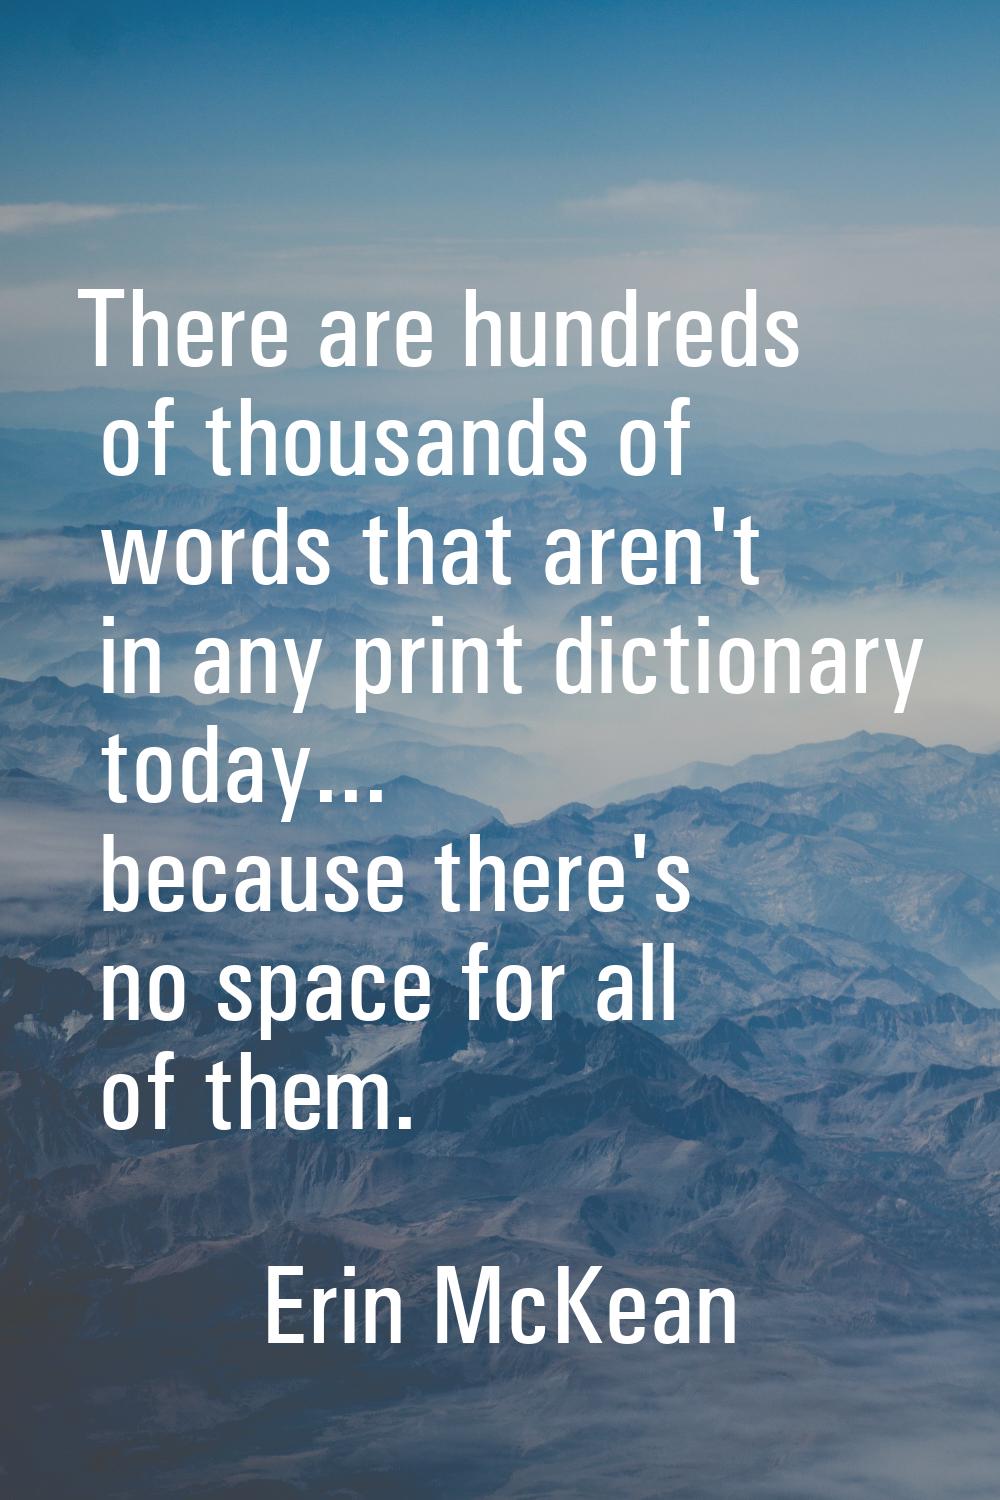 There are hundreds of thousands of words that aren't in any print dictionary today... because there